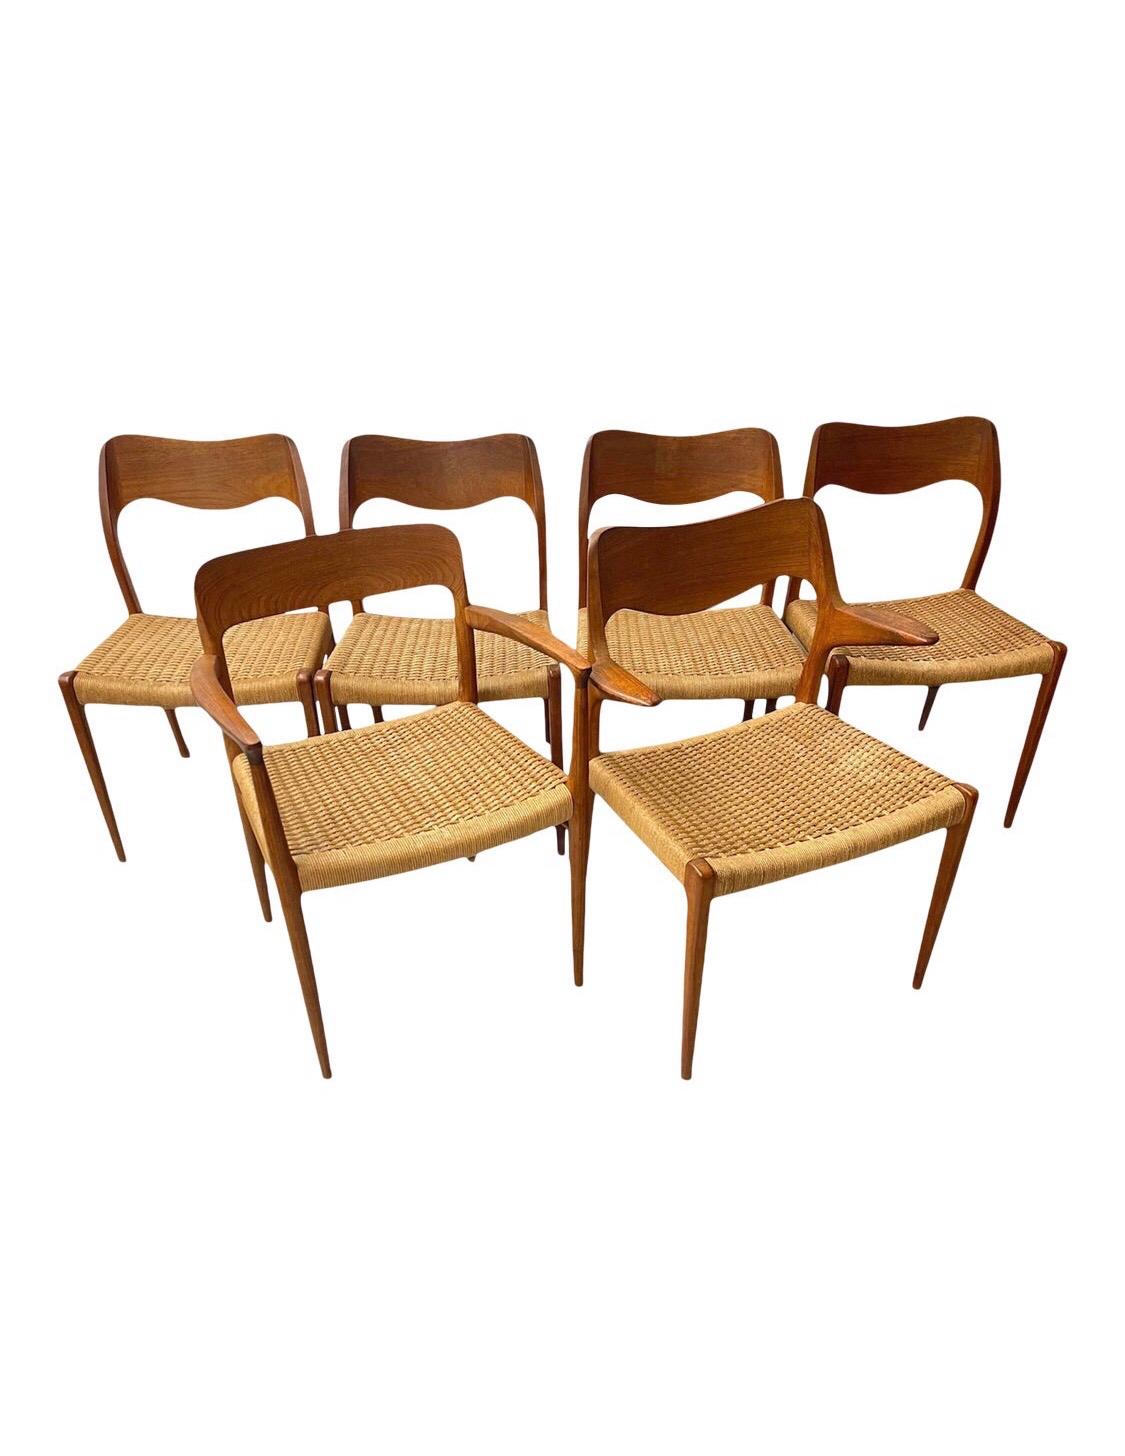 Mid century set of six Danish dining chairs by Niels Møller for J.L. Møller Møbelfabrik in teak. This set includes four model 71 side chairs, one model 55 armchair, and one model 75 chair. The chairs are from one owner home and in great vintage